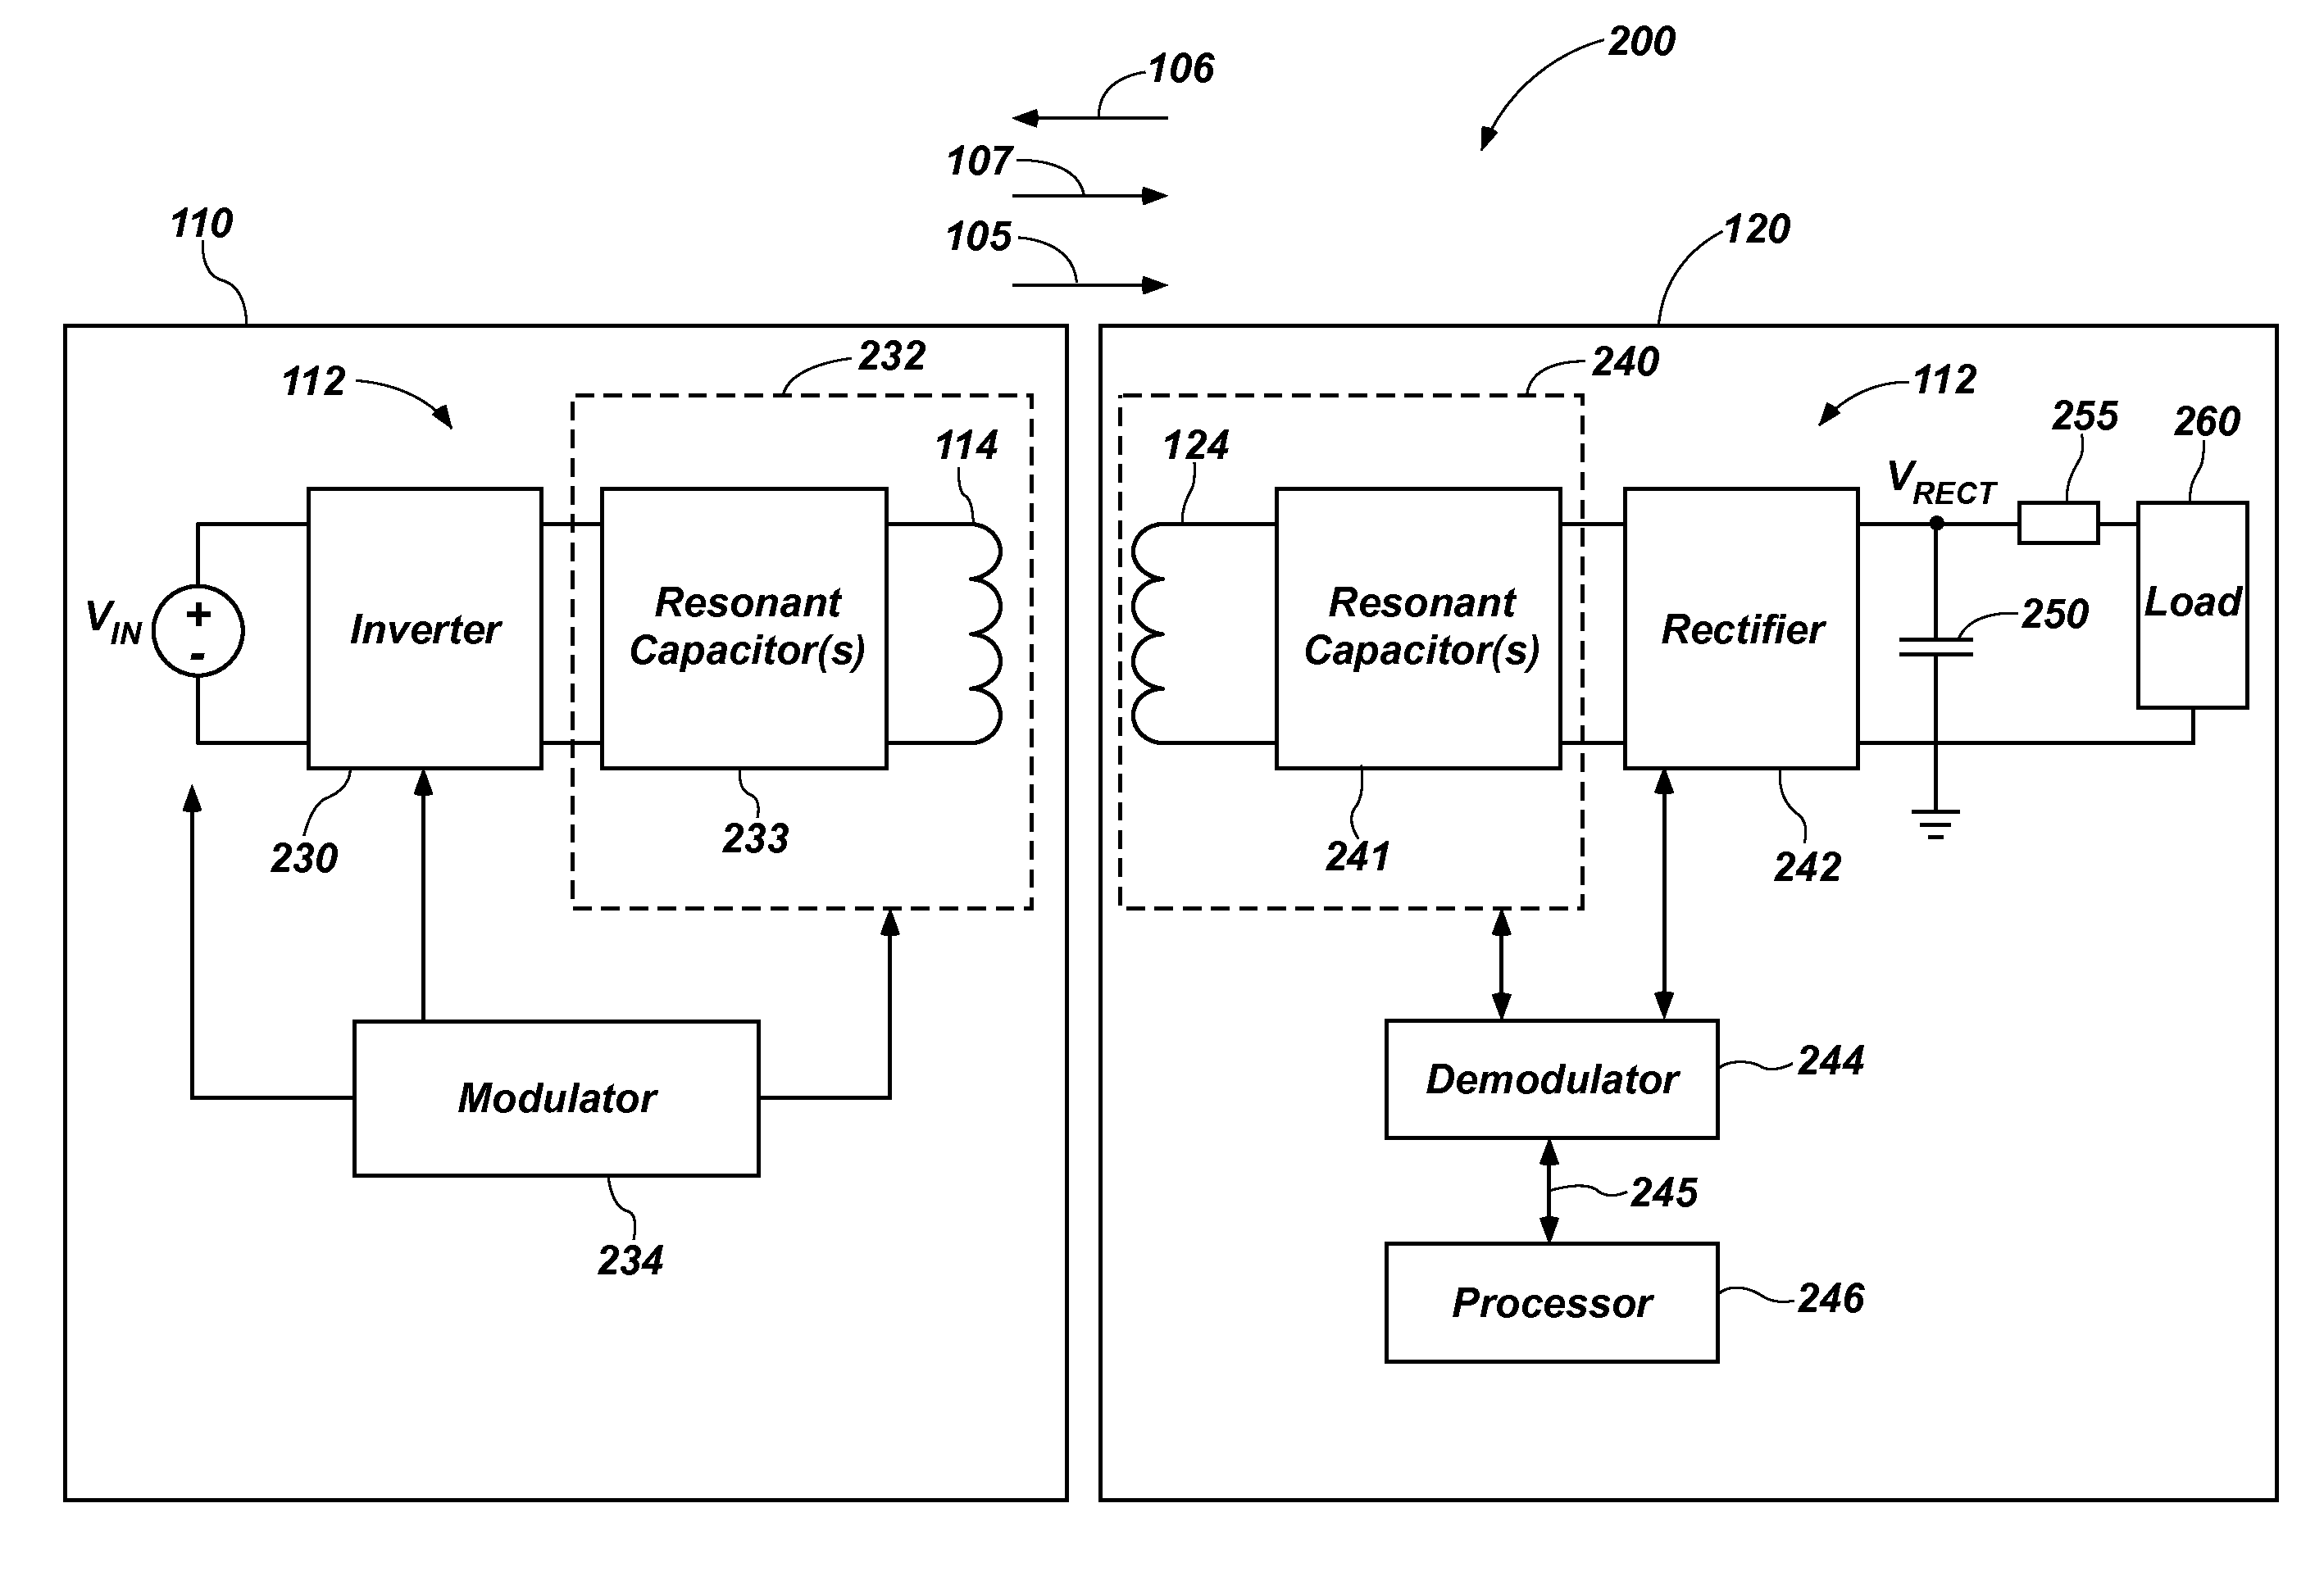 Apparatus, system, and method for back-channel communication in an inductive wireless power transfer system